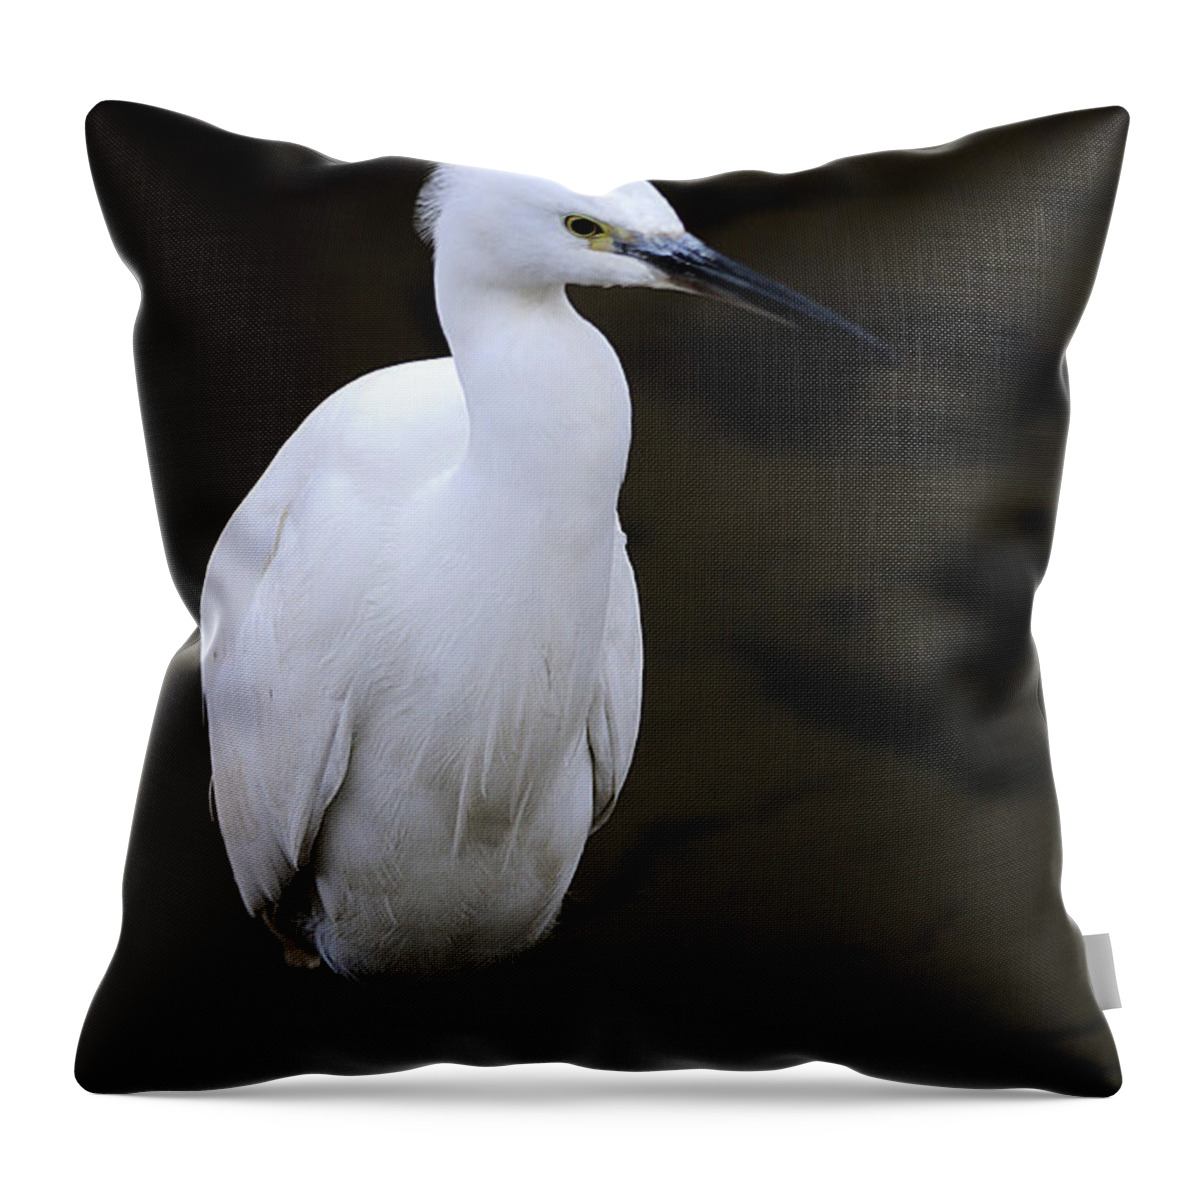 Animal Themes Throw Pillow featuring the photograph Little Egret by I'm Kazuo Ichikawa, Residing In Tokyo, Japan. I Have A Profo